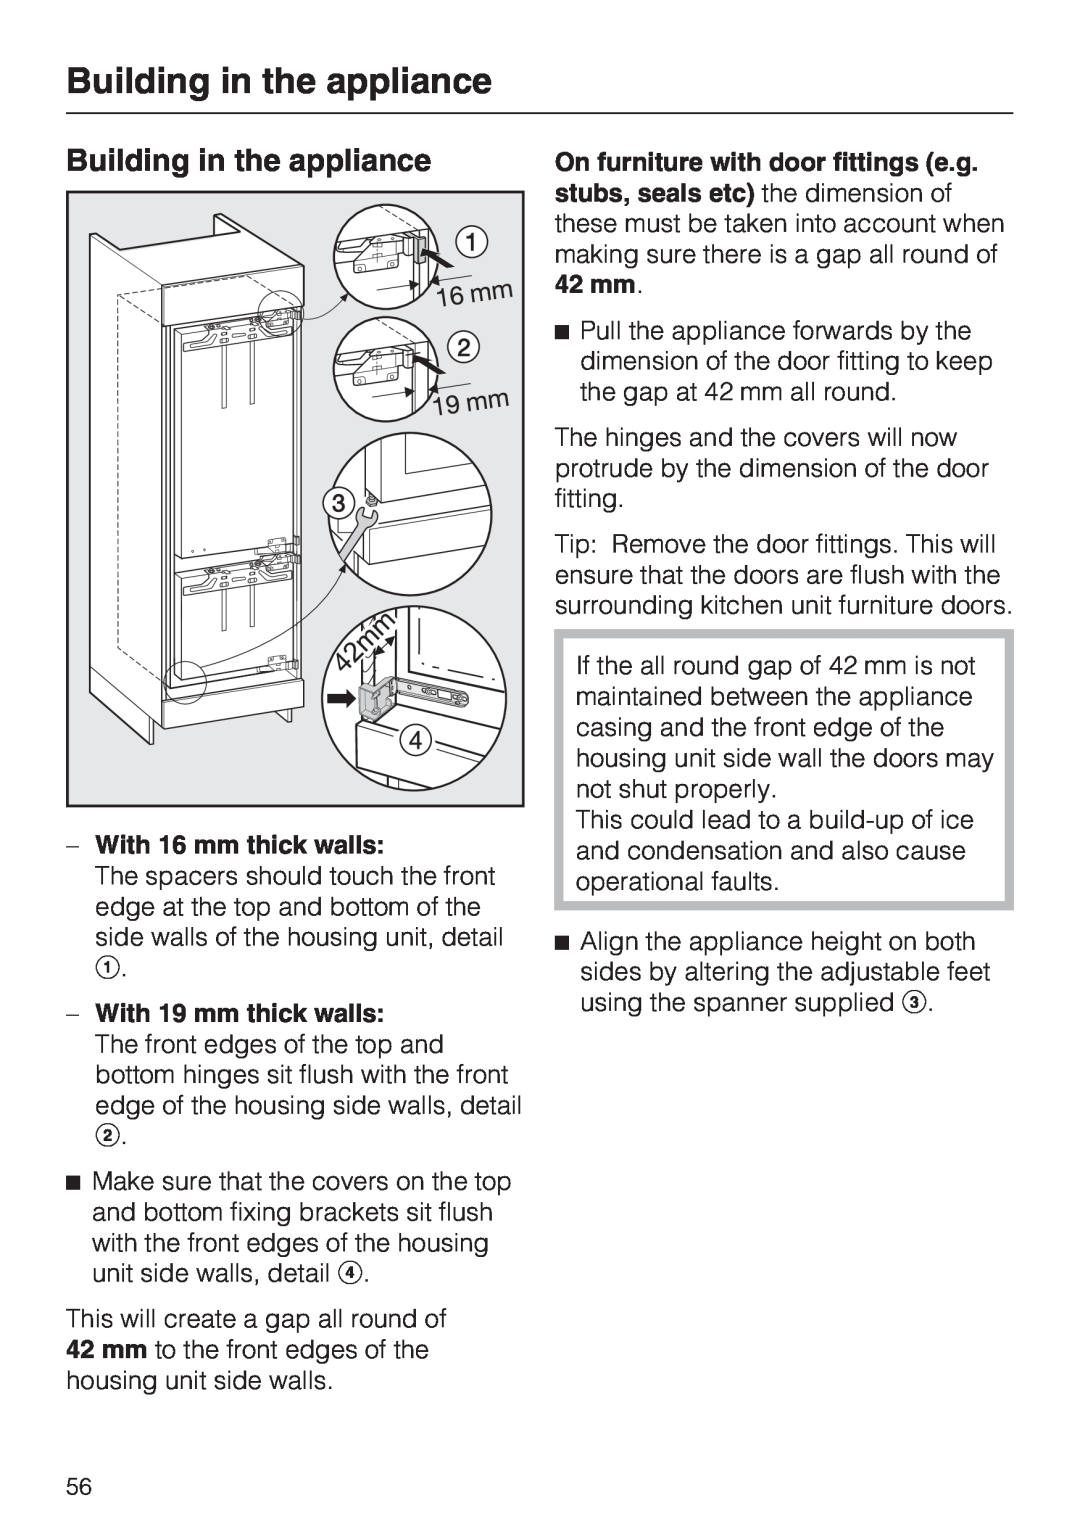 Miele KF 9757 ID installation instructions Building in the appliance, With 16 mm thick walls, With 19 mm thick walls 